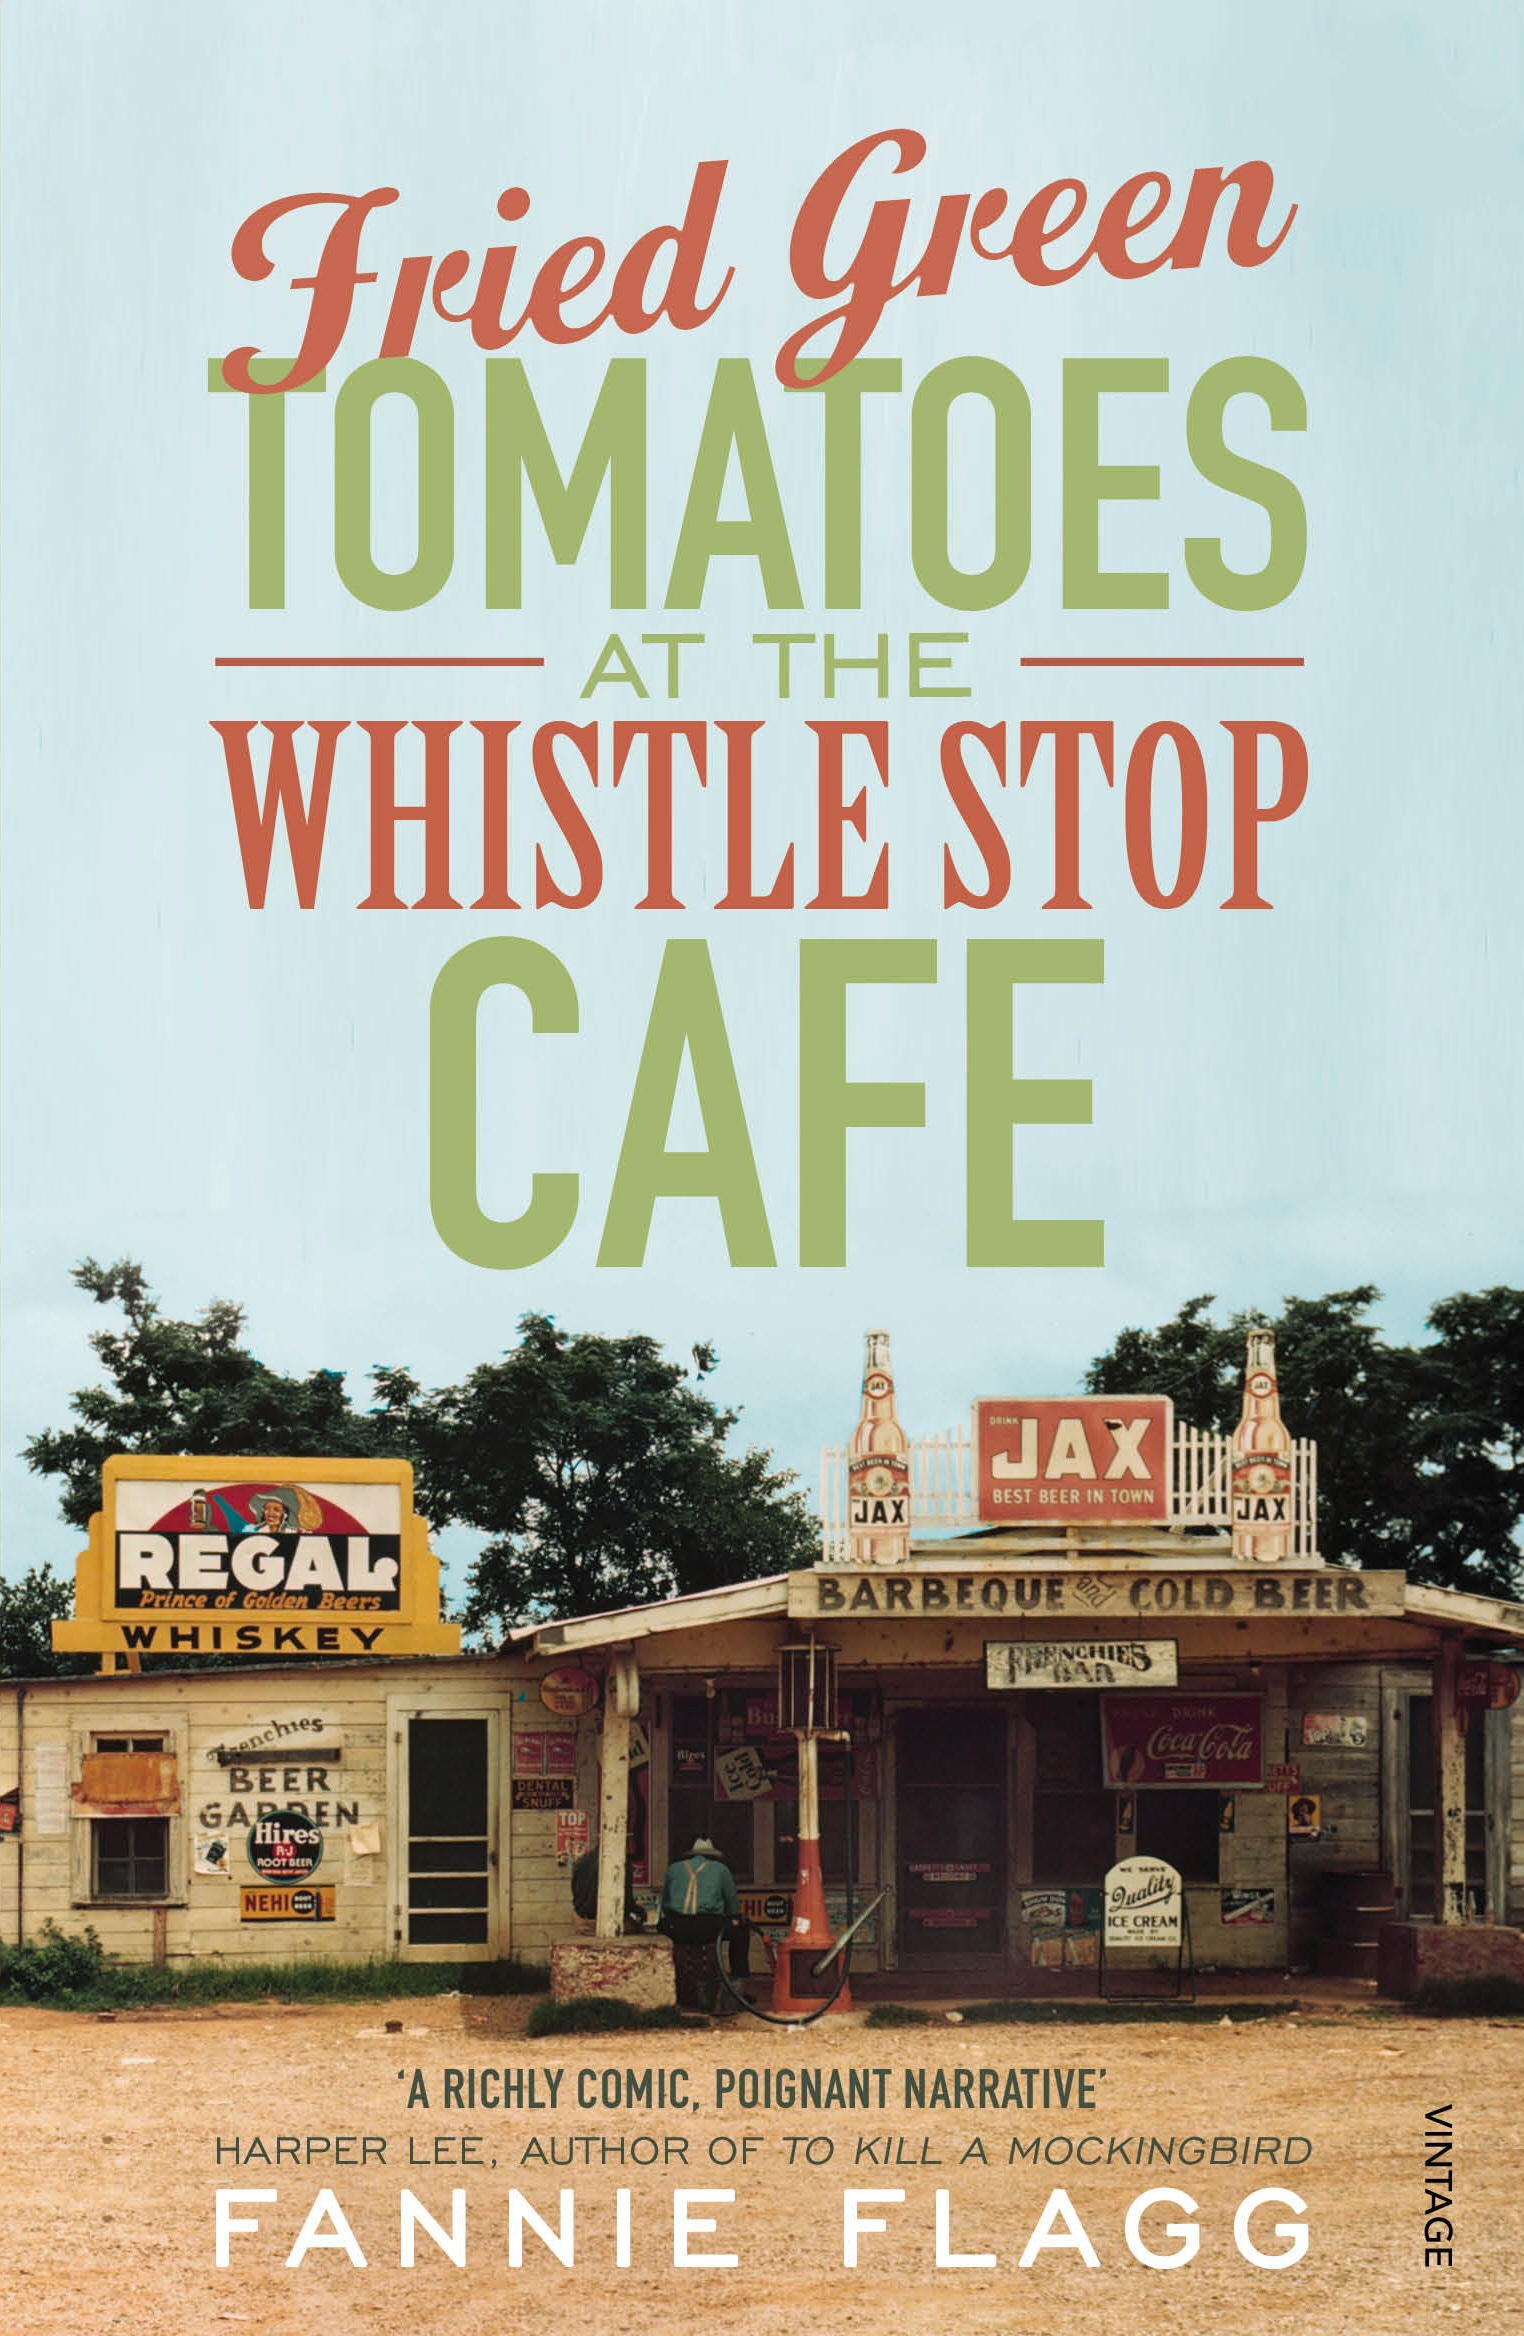 Book “Fried Green Tomatoes At The Whistle Stop Cafe” by Fannie Flagg — April 2, 1992